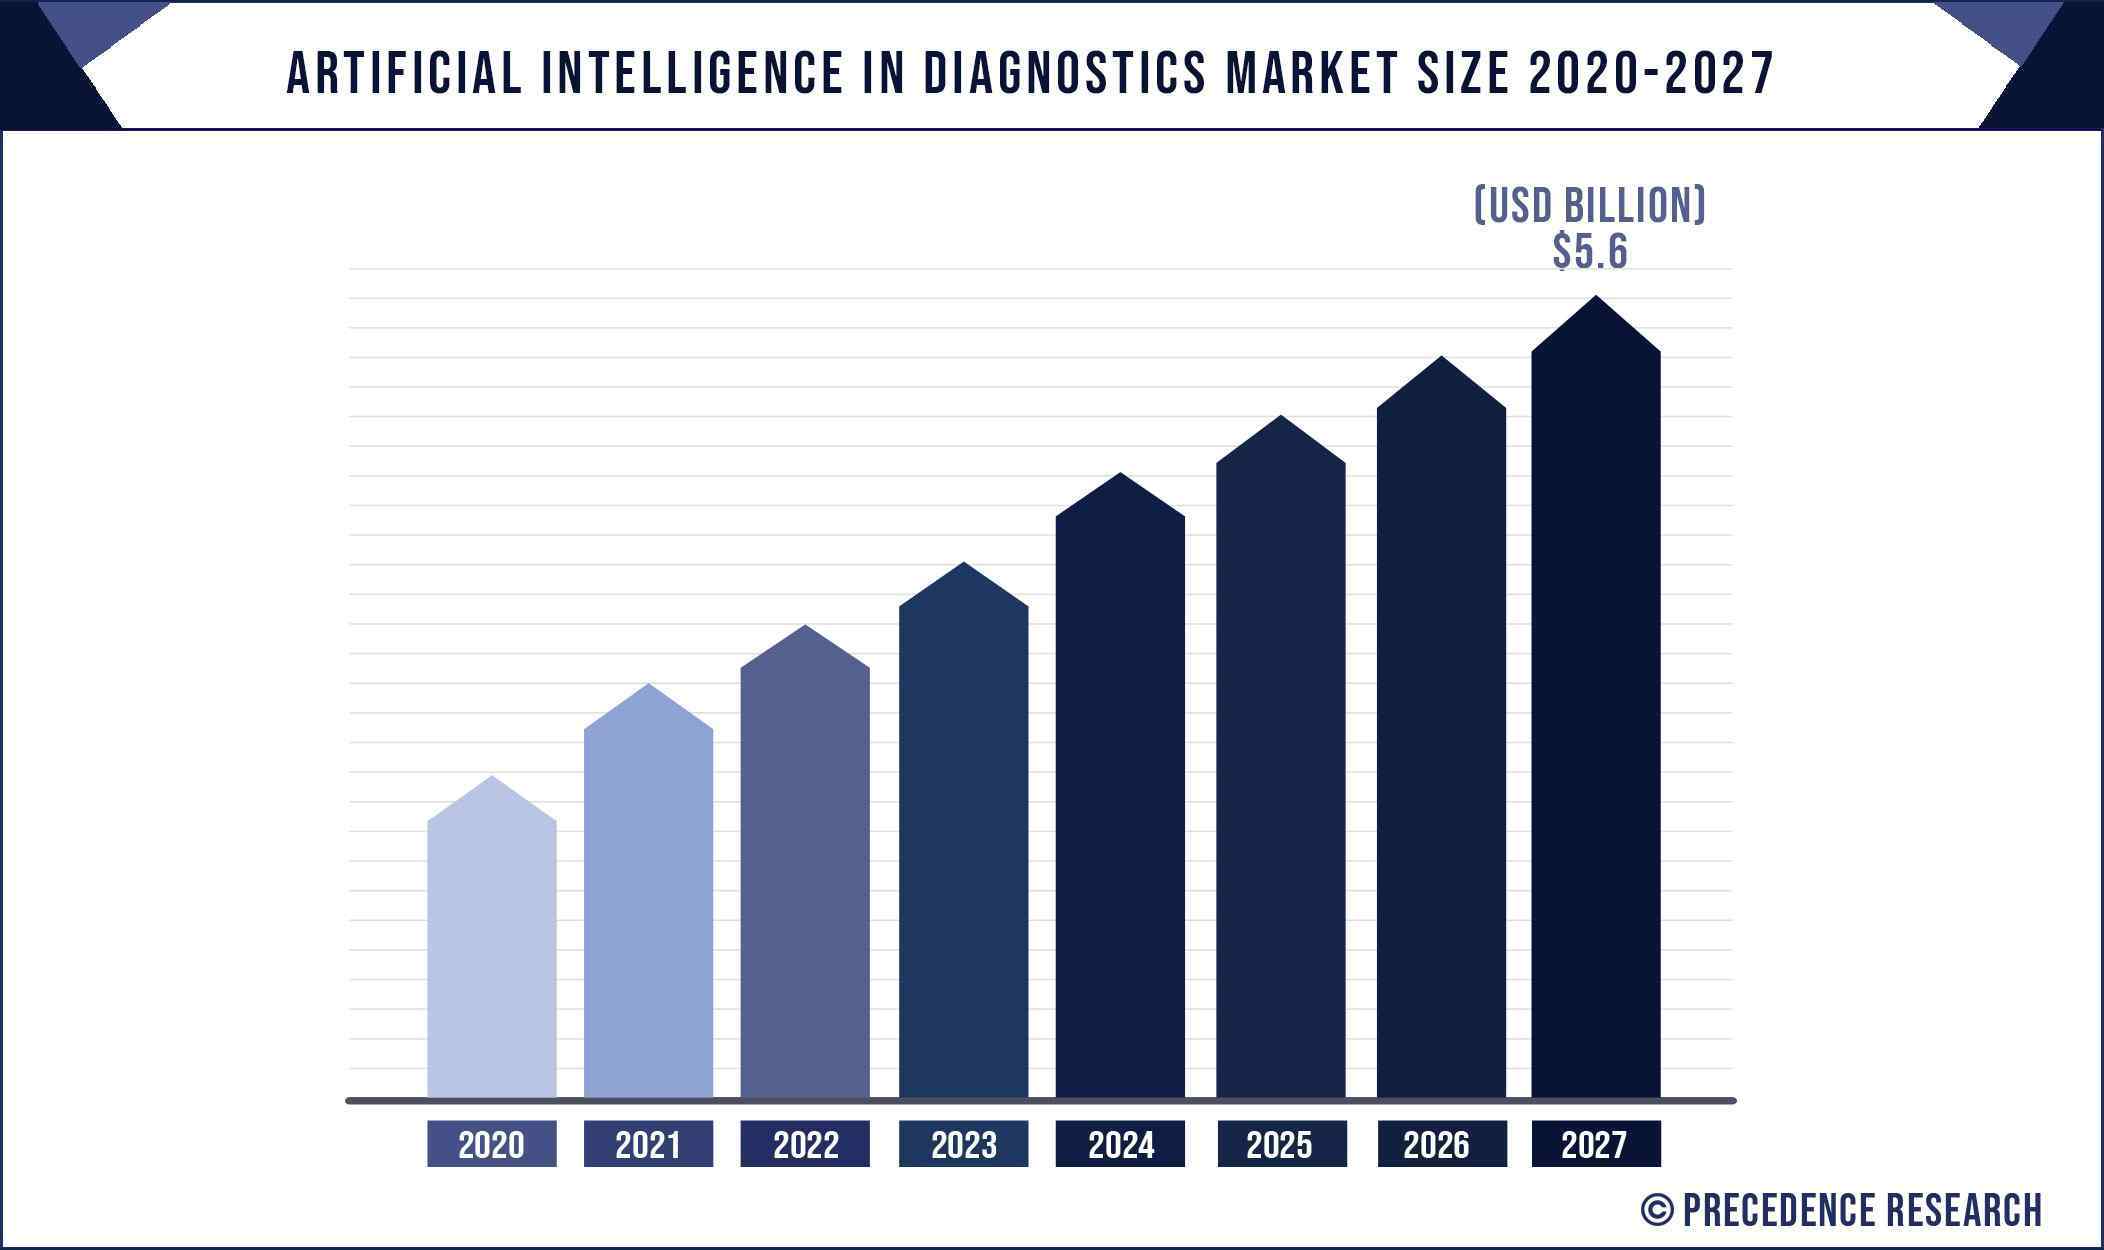 Artificial Intelligence in Diagnostics Market Size 2020 to 2027